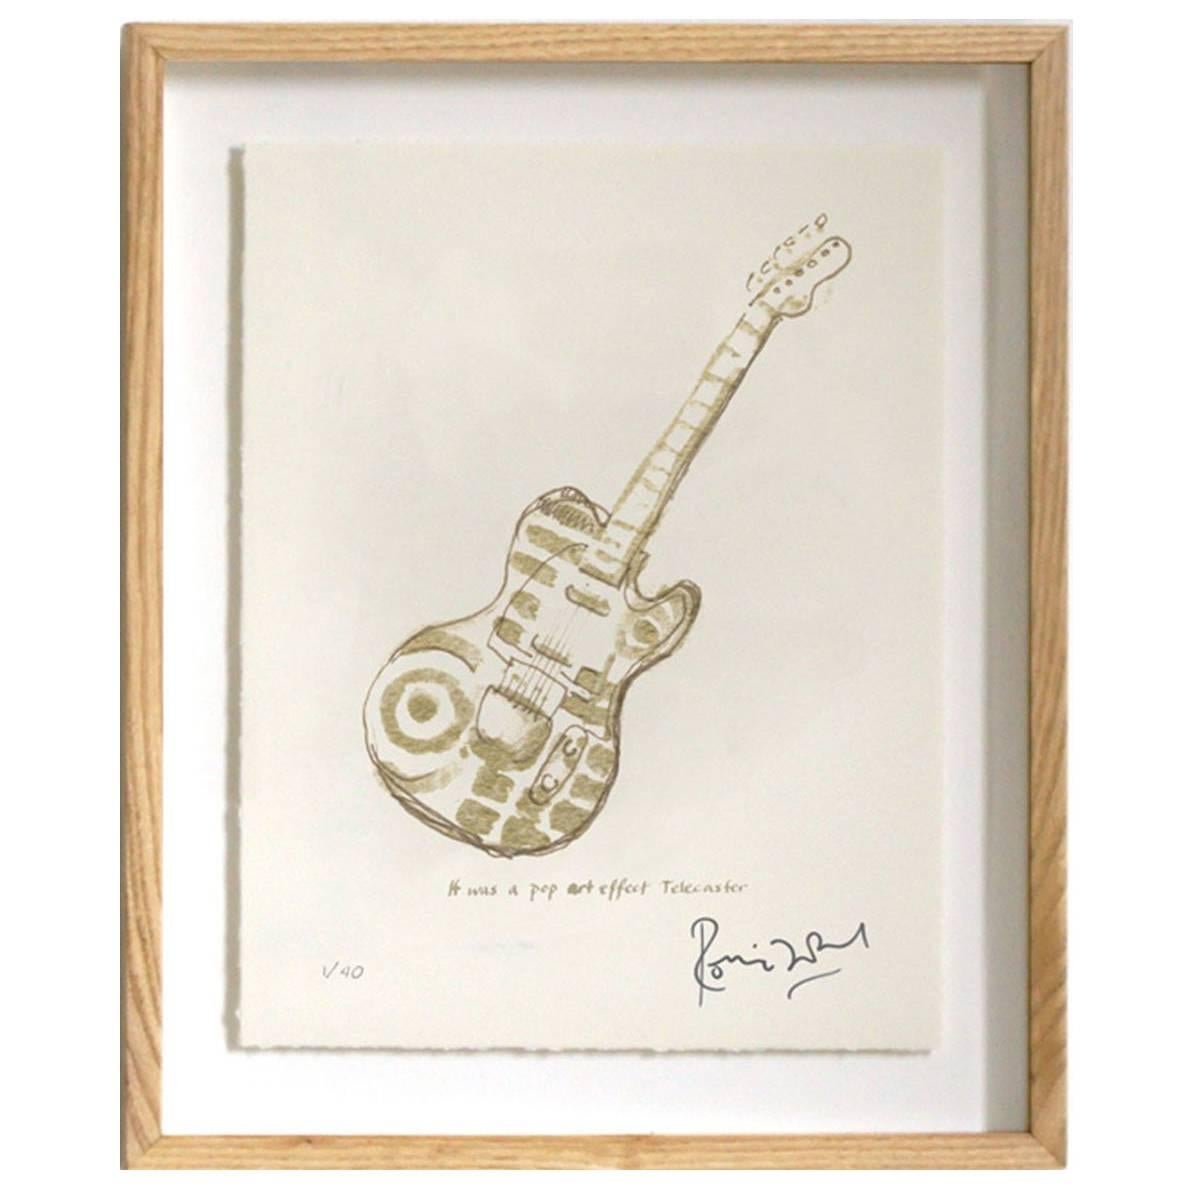 "Pop Art Telecaster" Signed Limited Edition Framed Print by Ronnie Wood For Sale